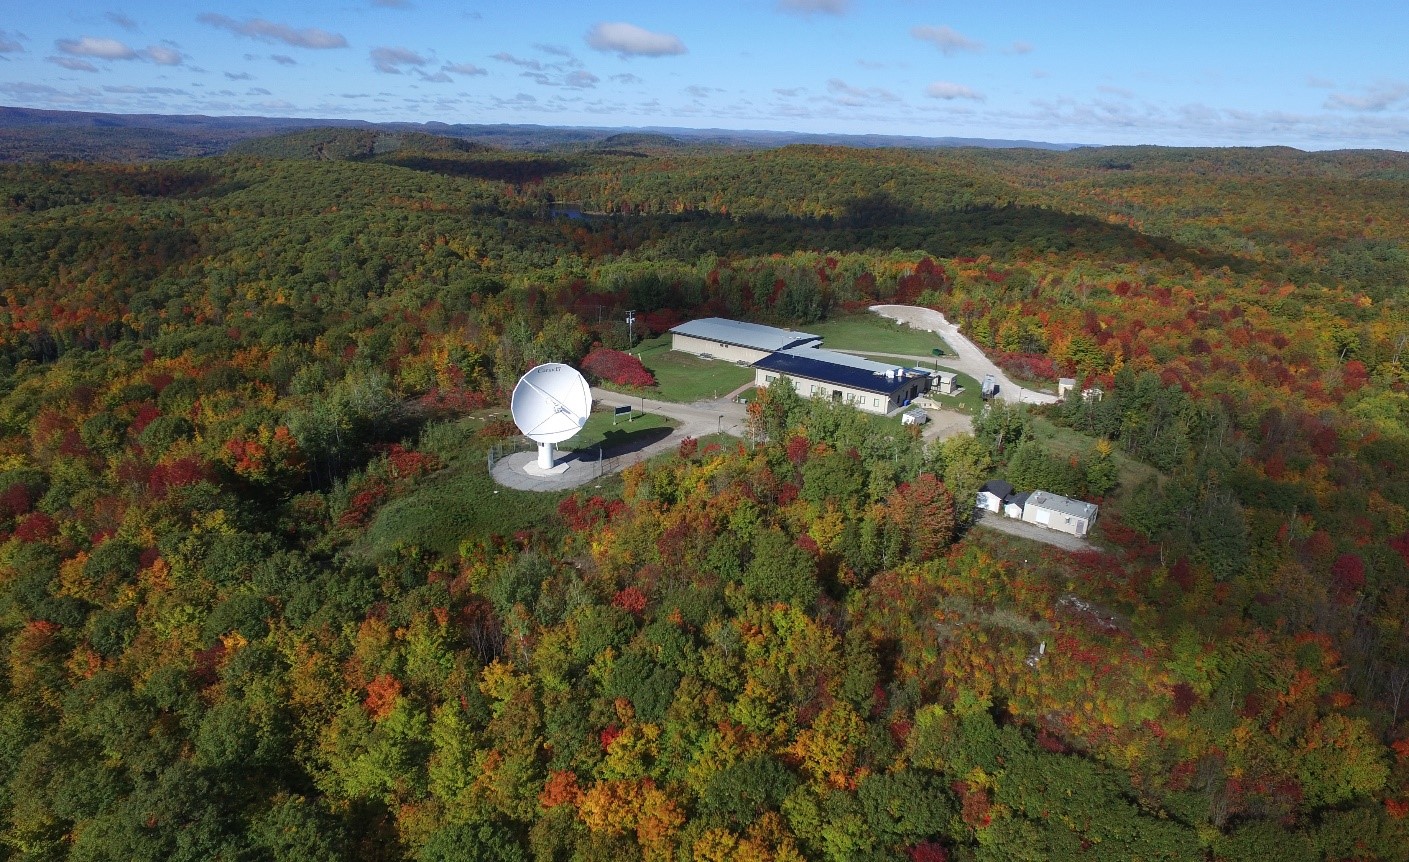 This image shows the Gatineau Satellite Station with 2 dish antennas and two buildings